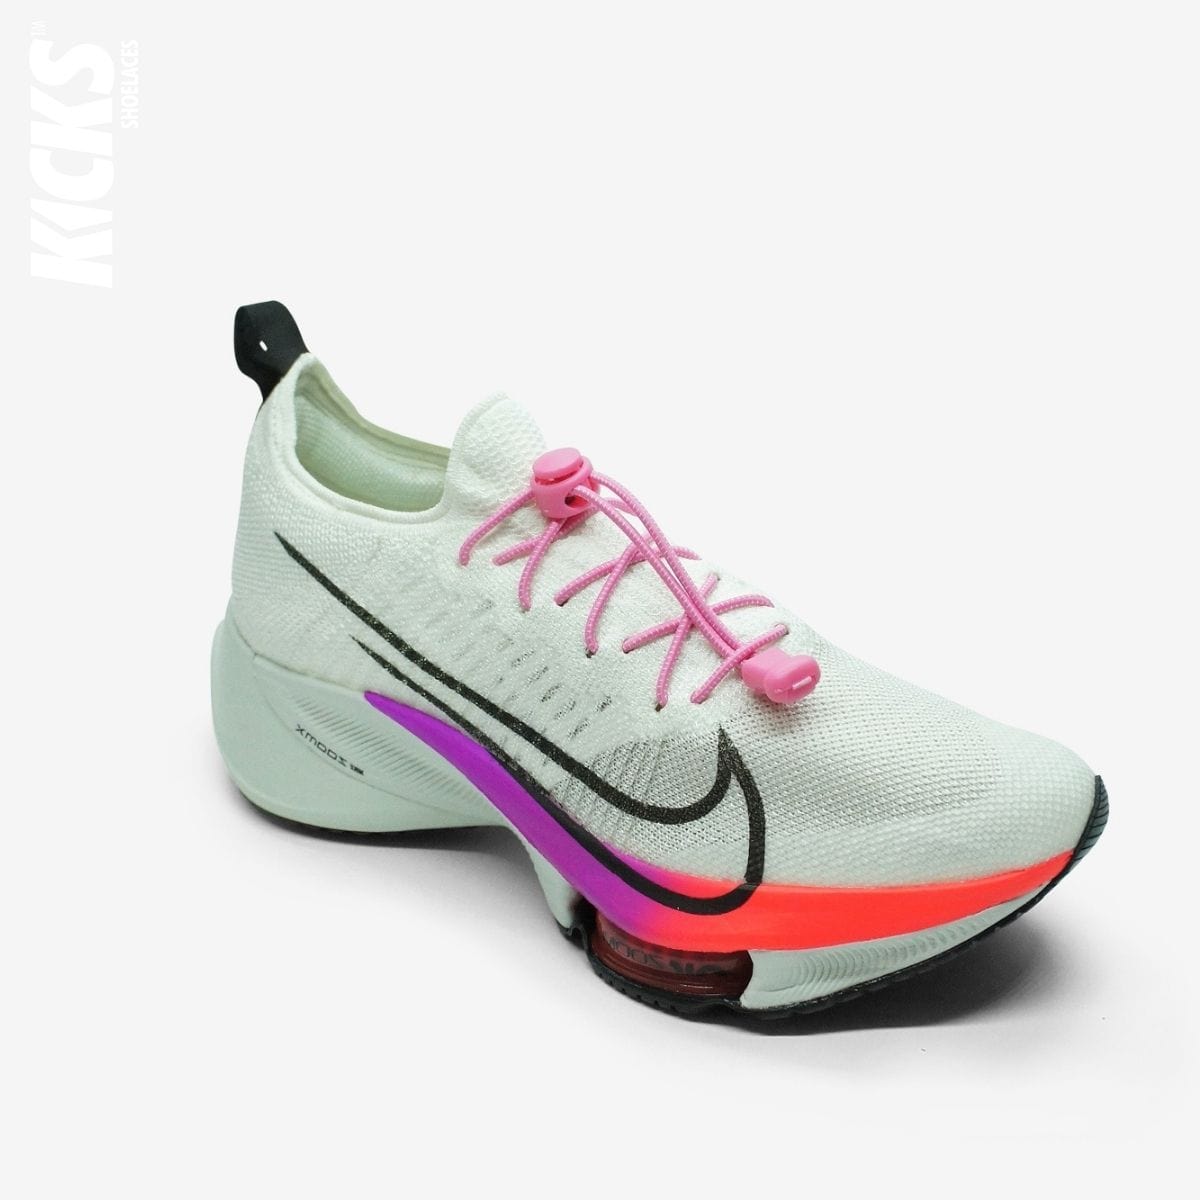 quick-laces-with-pink-elastic-no-tie-shoelaces-on-nike-running-shoe-by-kicks-shoelaces